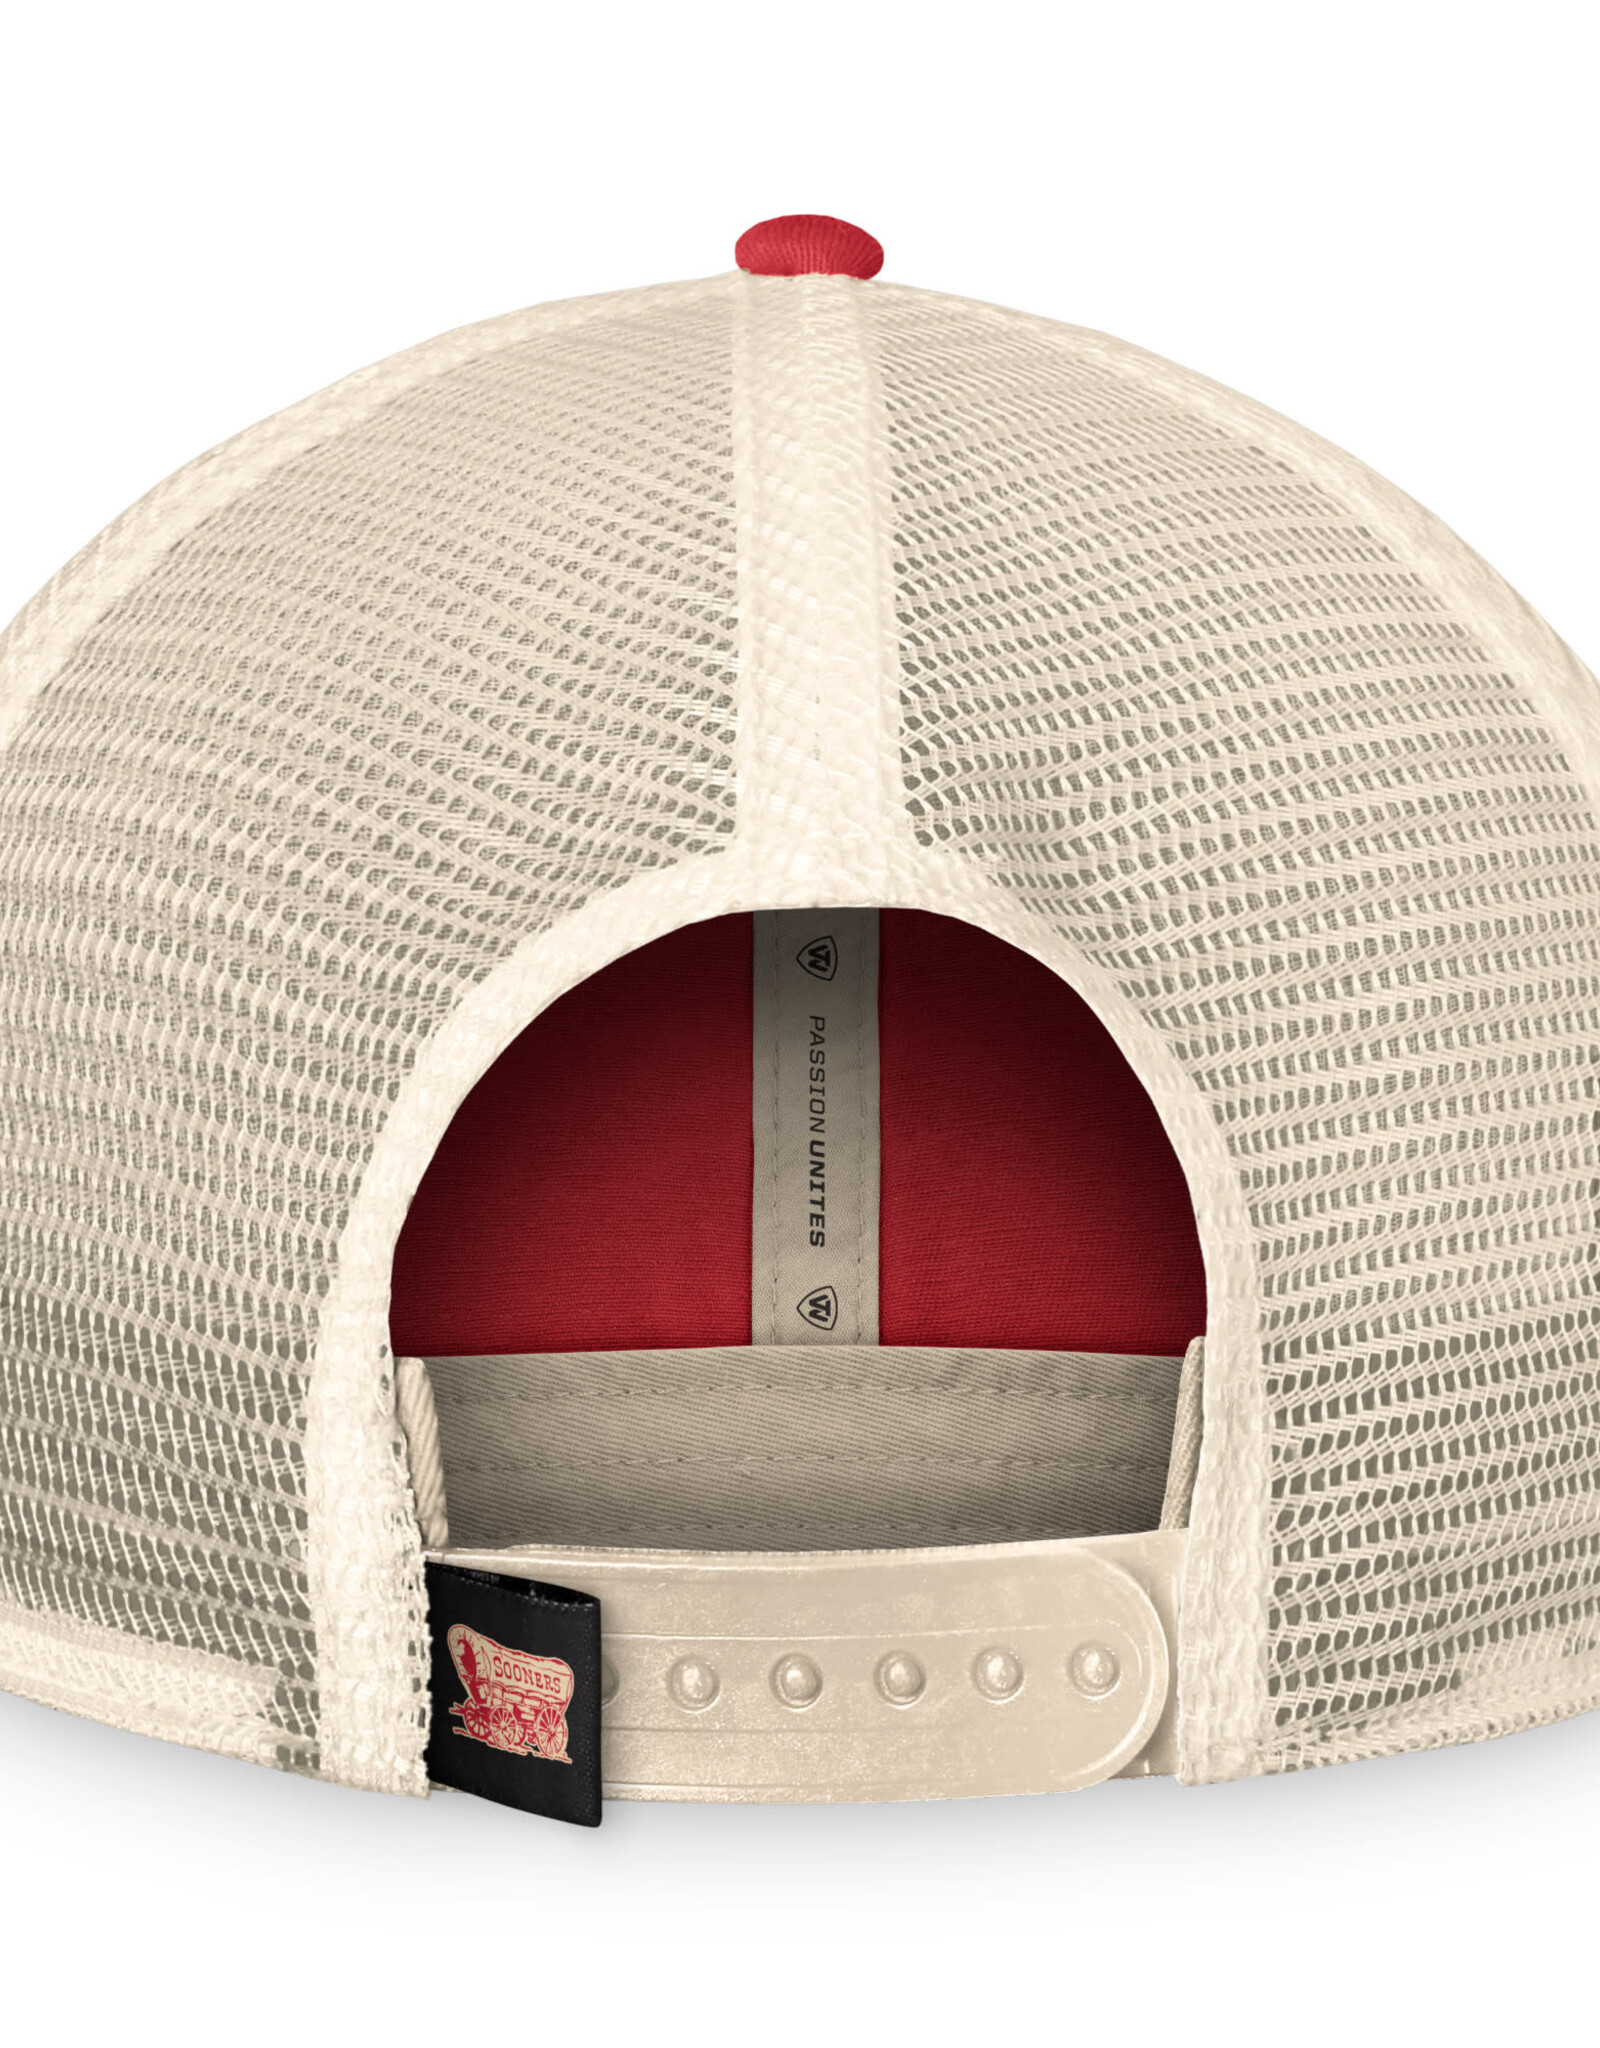 TOW TOW OU Sooners Lineage Unstructured Crimson Meshback Cap